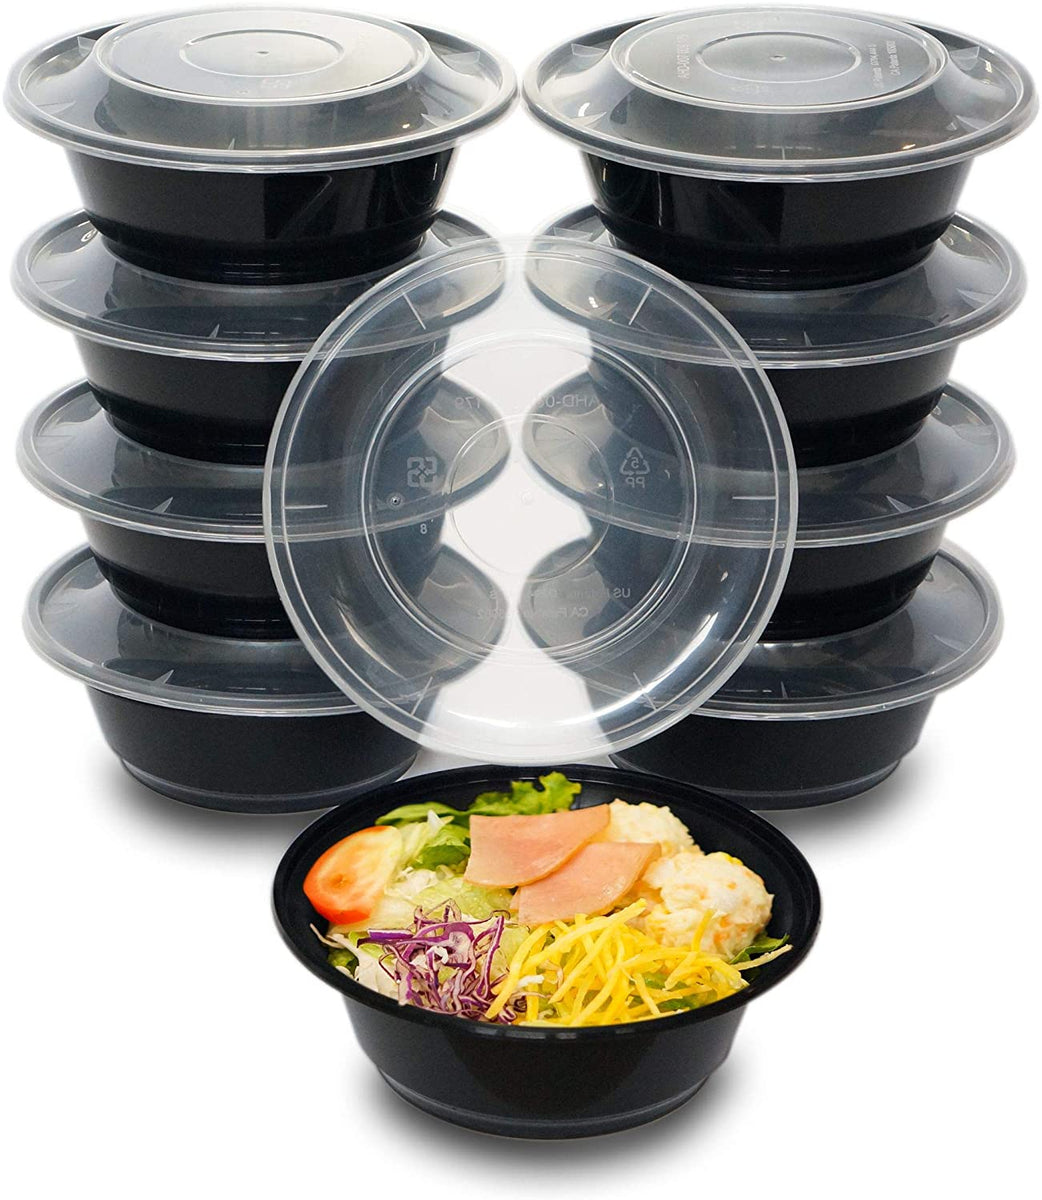 50 Pack] 40 oz Black Meal Prep Containers Round Bowls with Lids